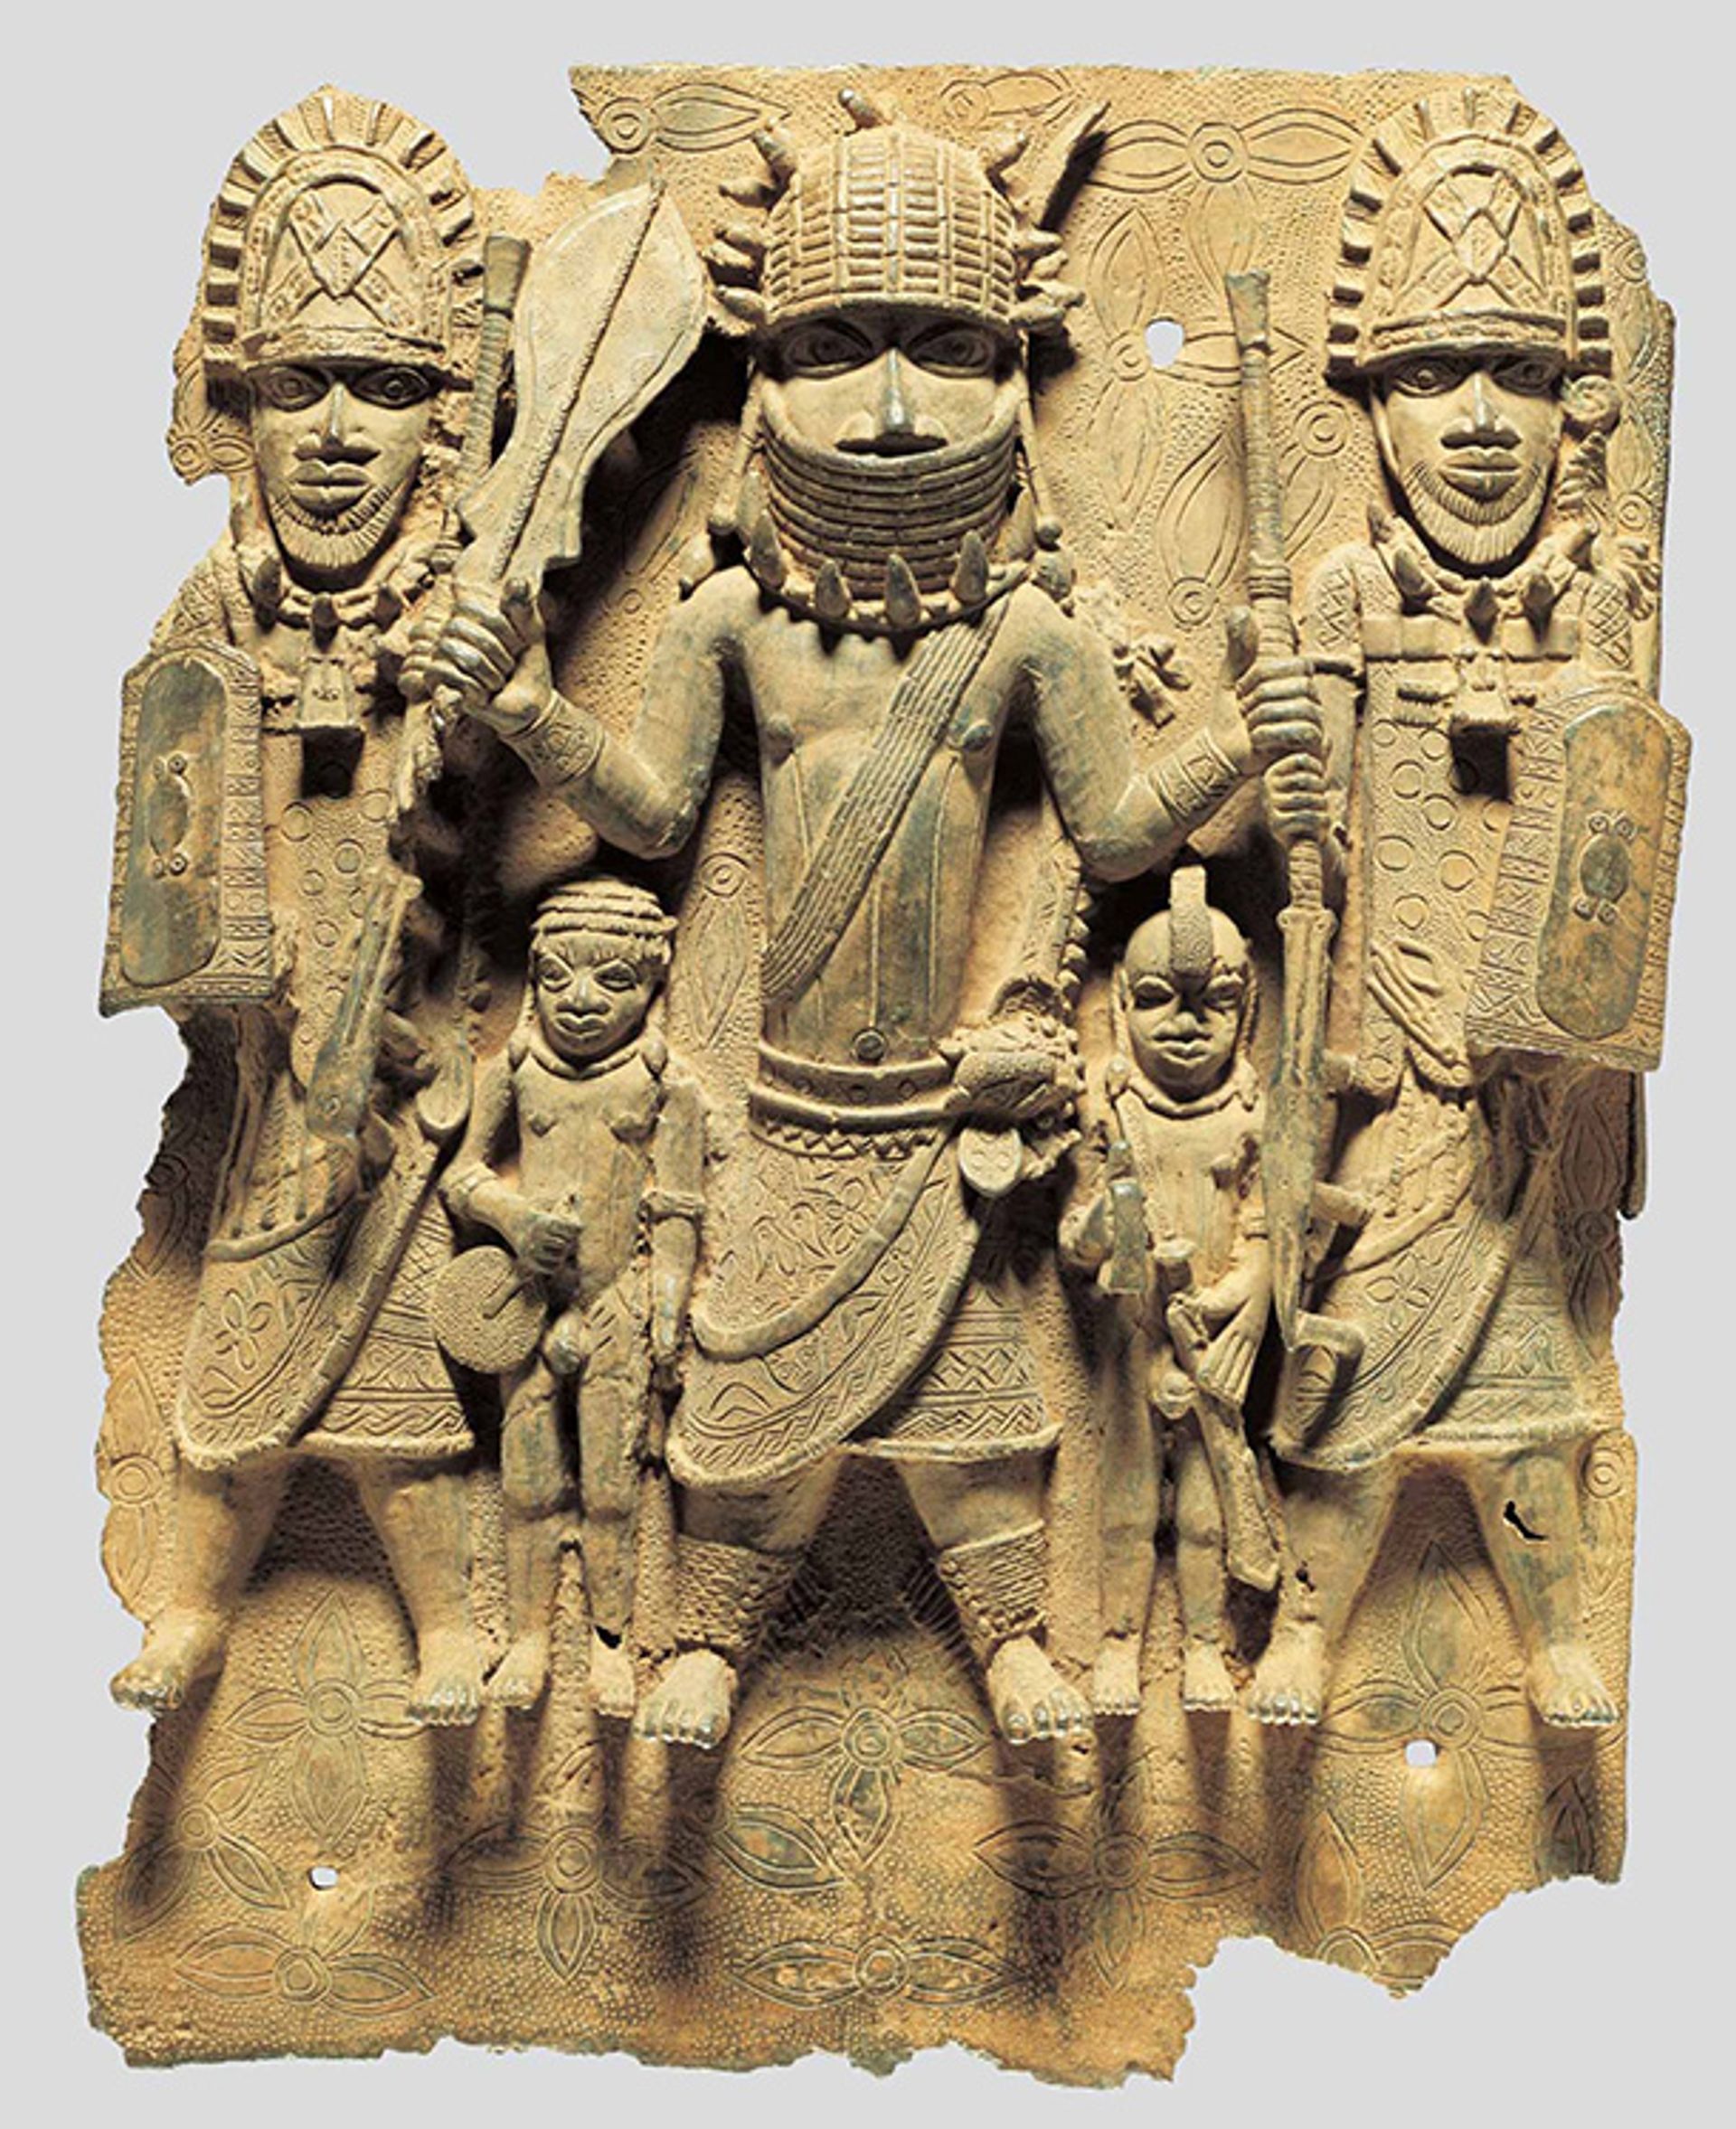 A Relief plaque depicting a king (oba) and four attendants (16th century), in the collection of the Ethnological museum in Berlin Photo: © Staatliche Museen zu Berlin, Ethnologisches Museum / Claudia Obrocki